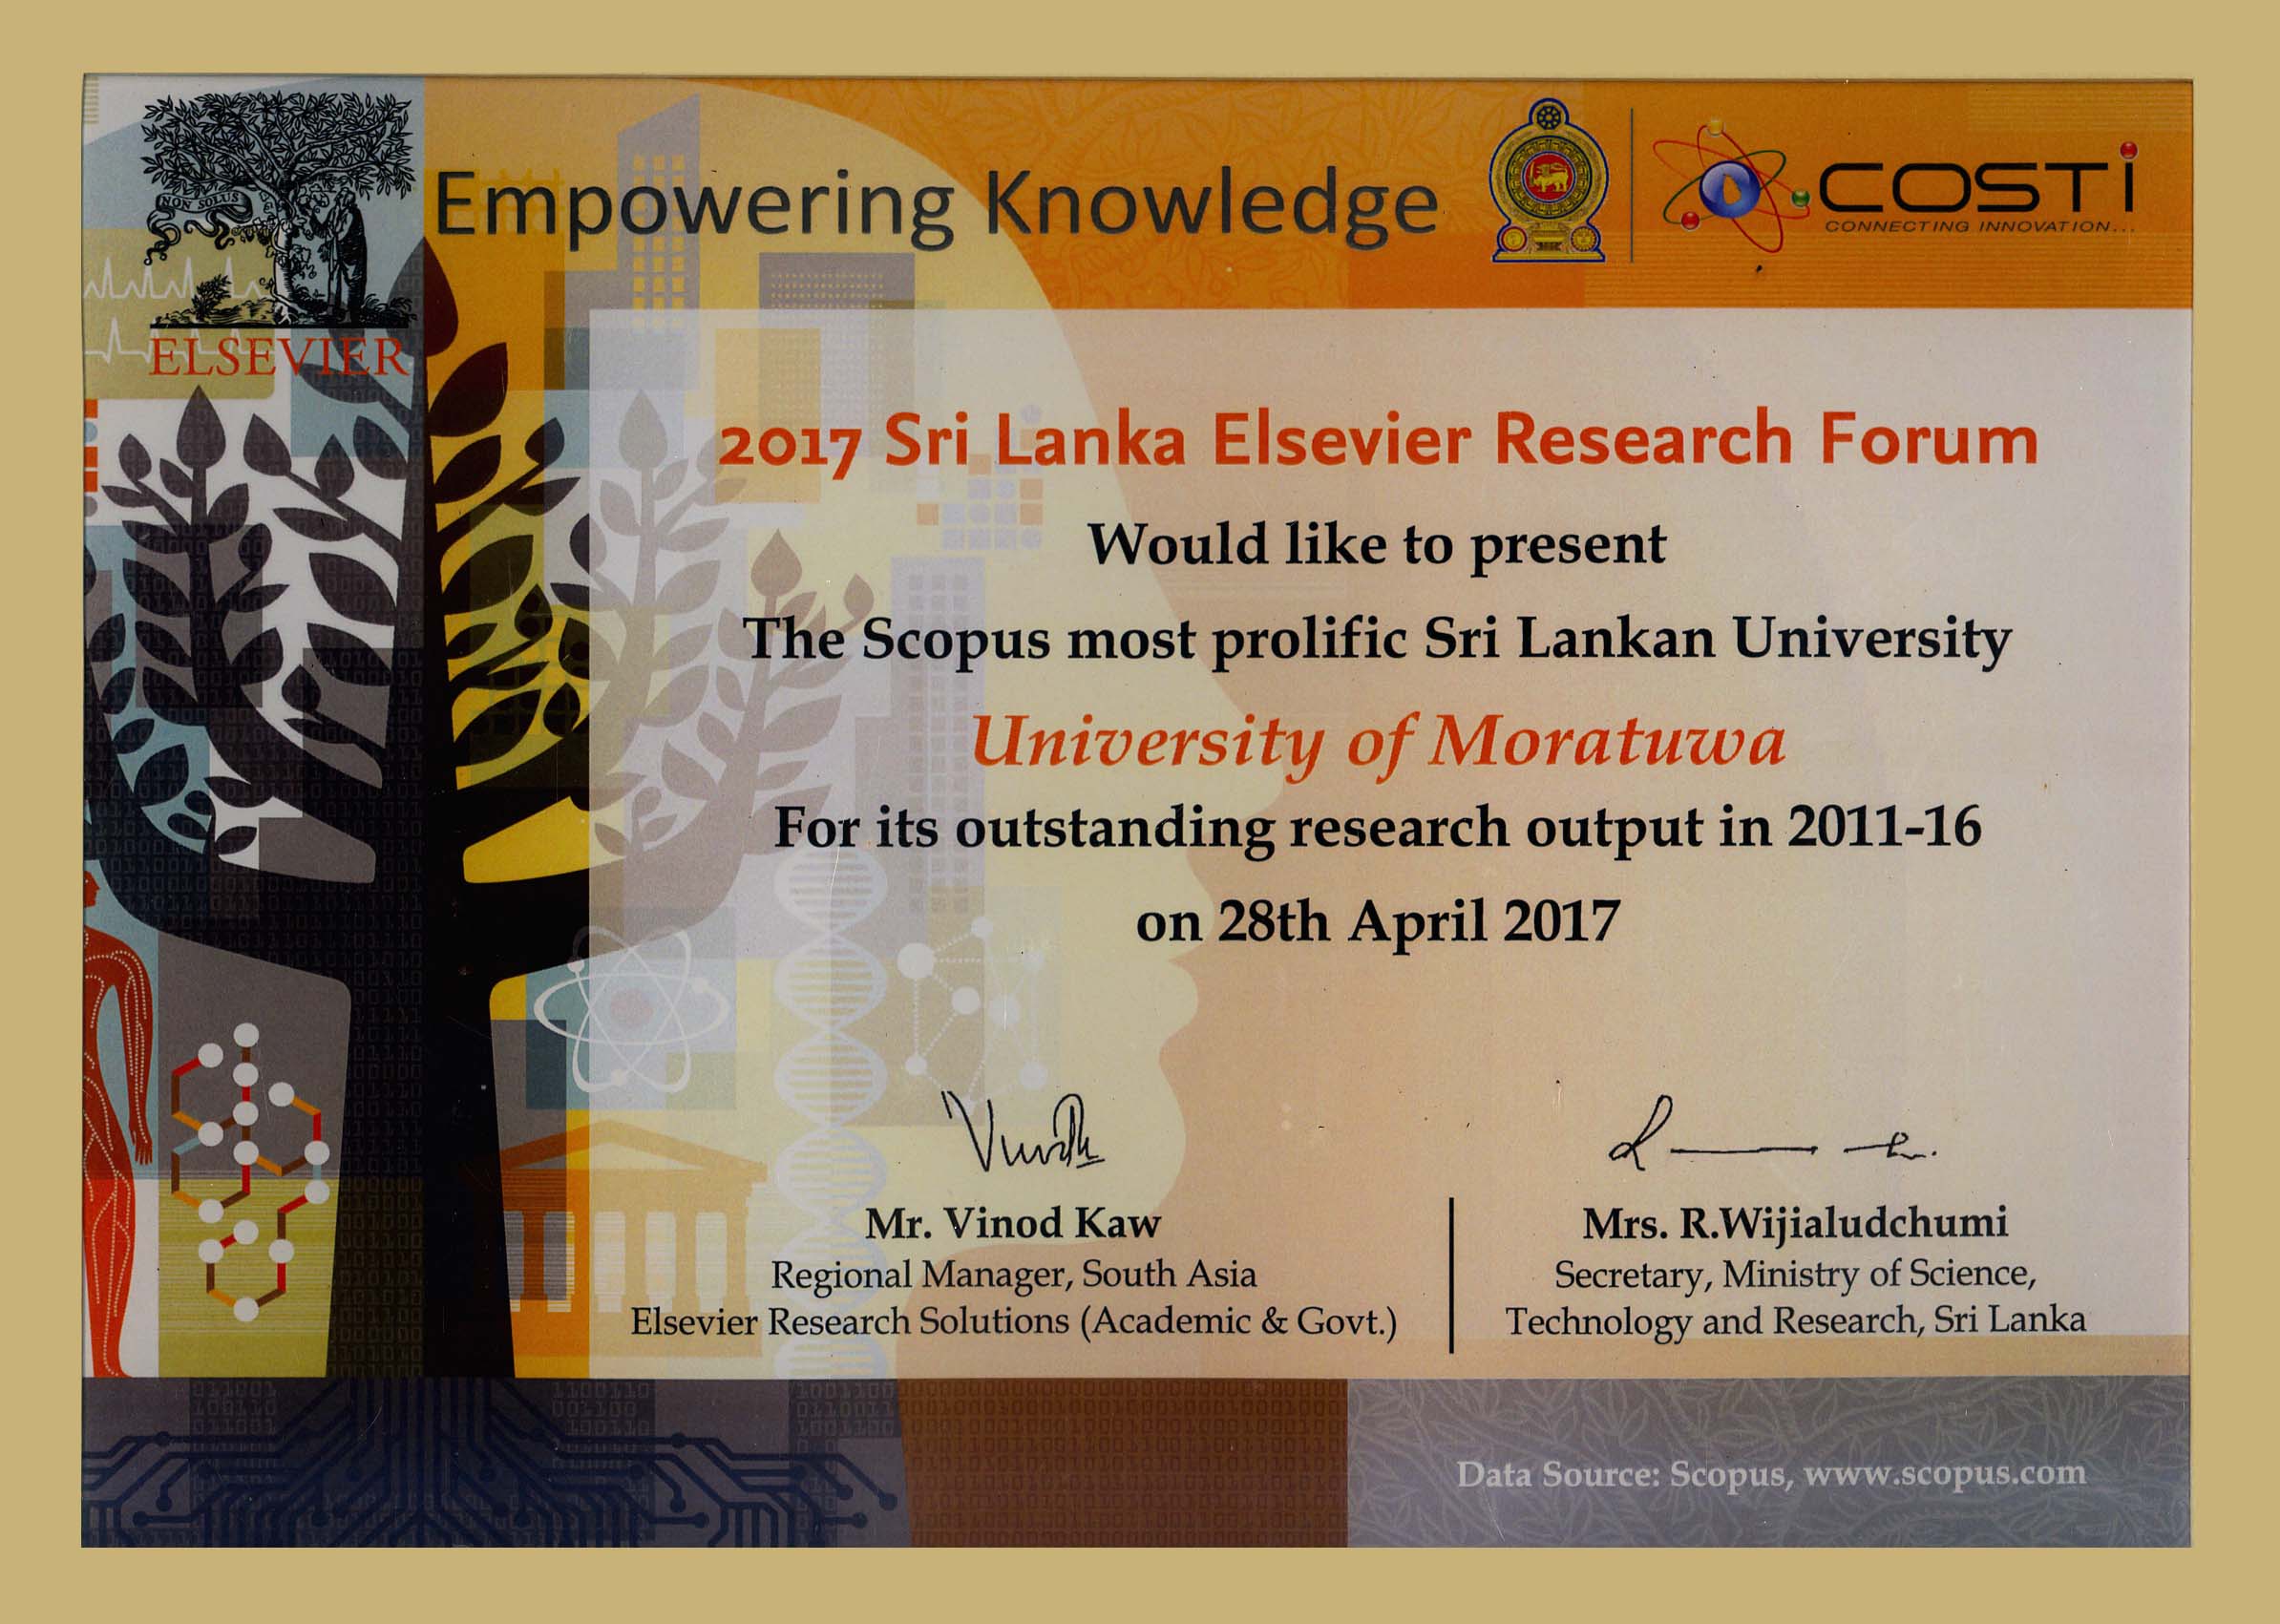 Most prolific Sri Lankan University for outstanding research output (2011-2016)